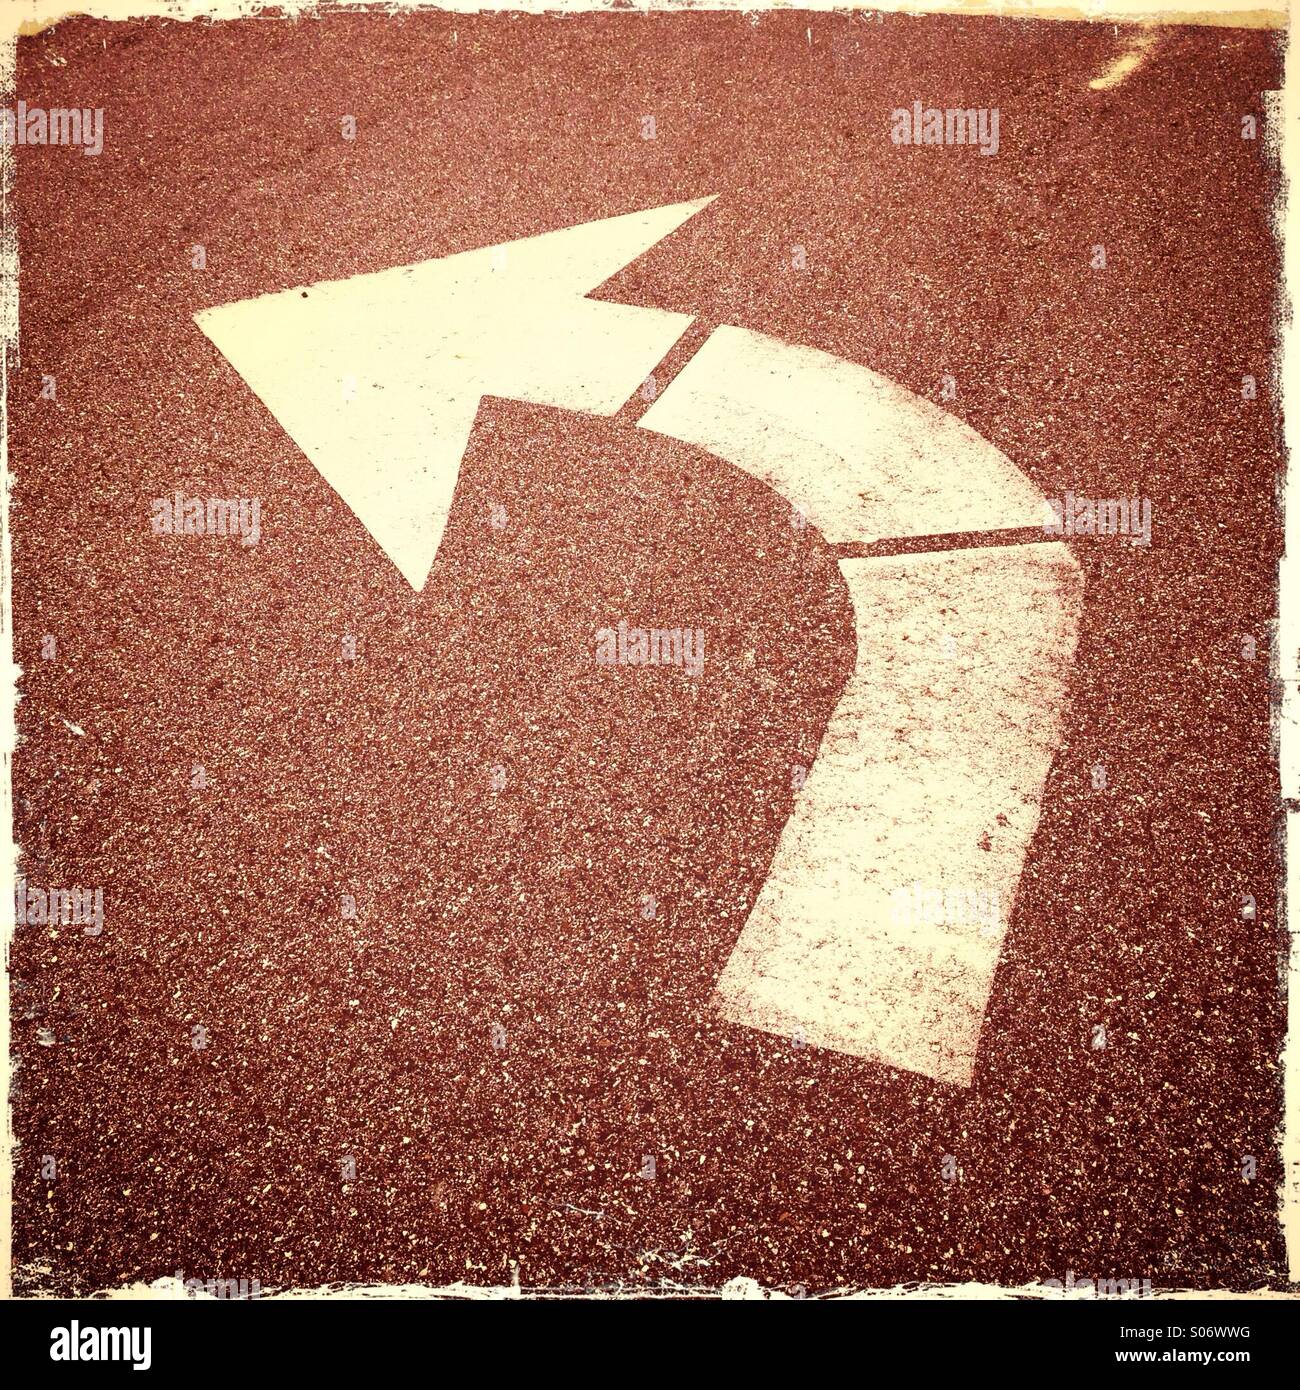 An arrow in the street indicating a turn lane. Stock Photo